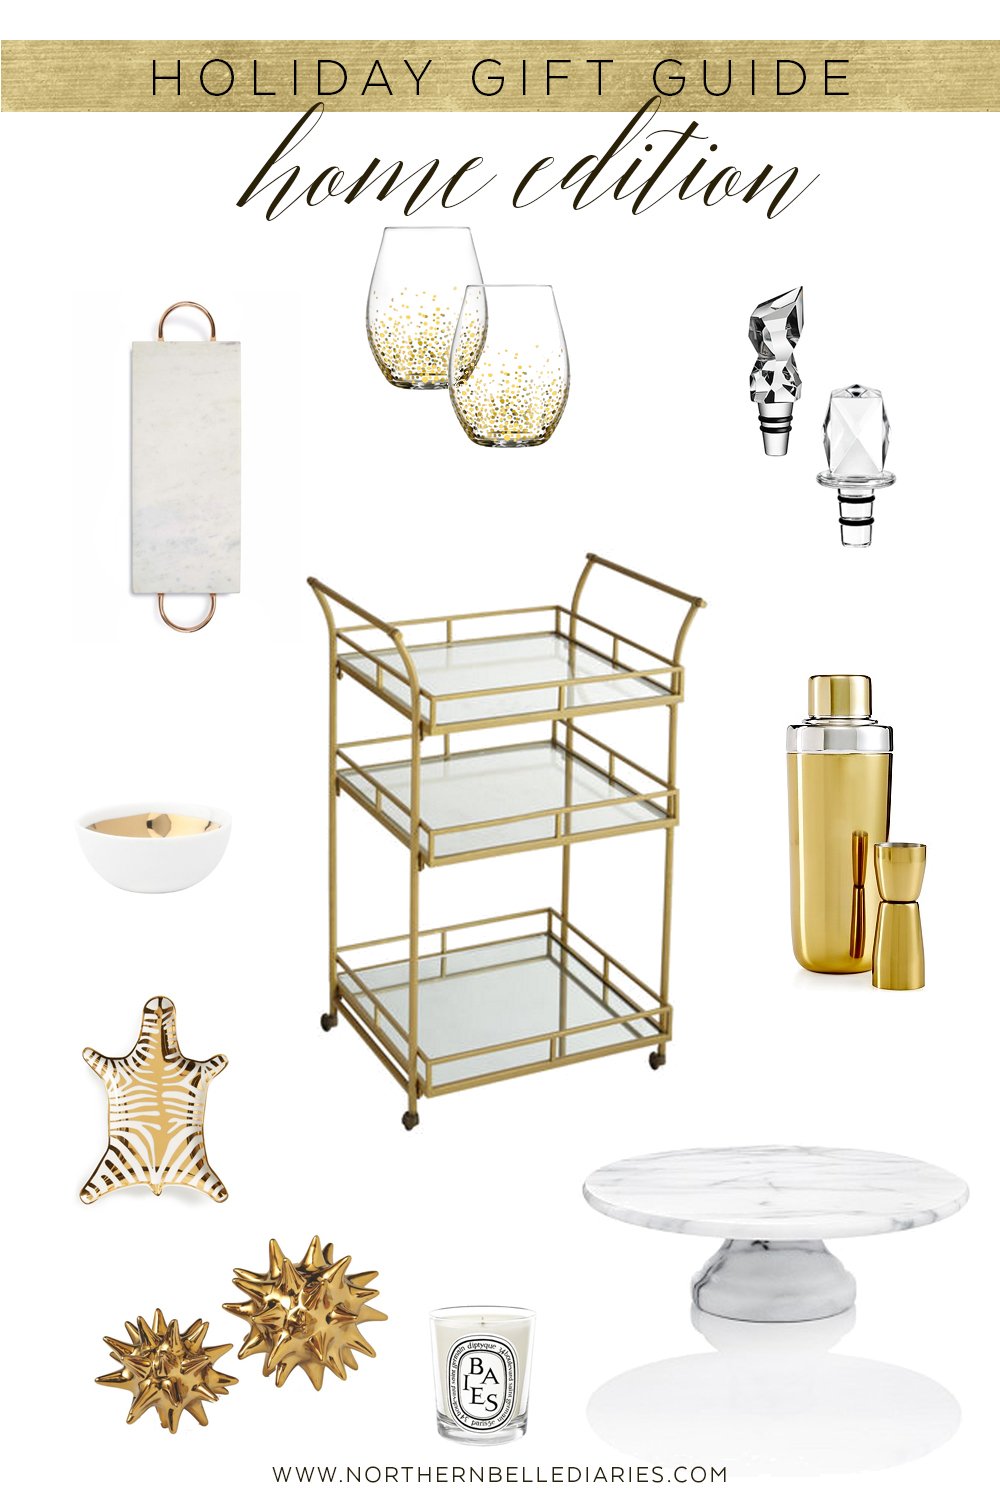 Gift Guide: Home Edition. The perfect gifts for the hostess, mom, or any special woman on your Christmas list.